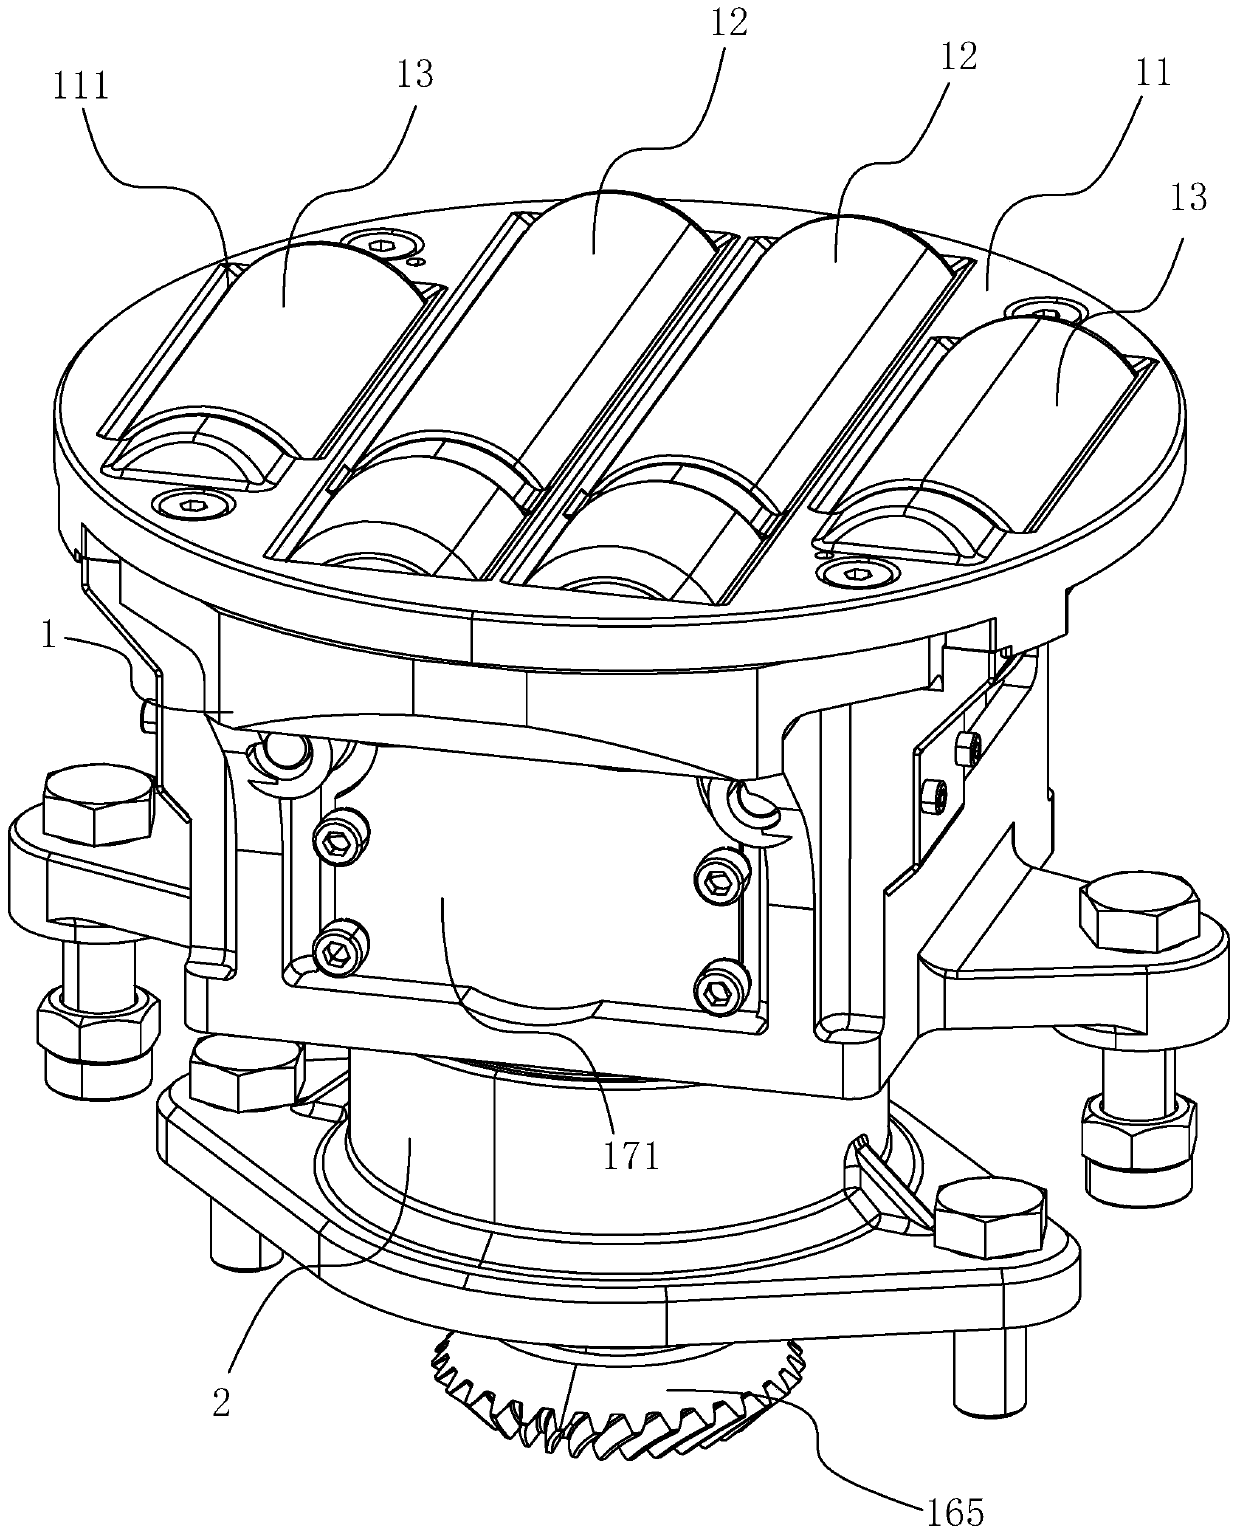 Gear box structure turntable assembly